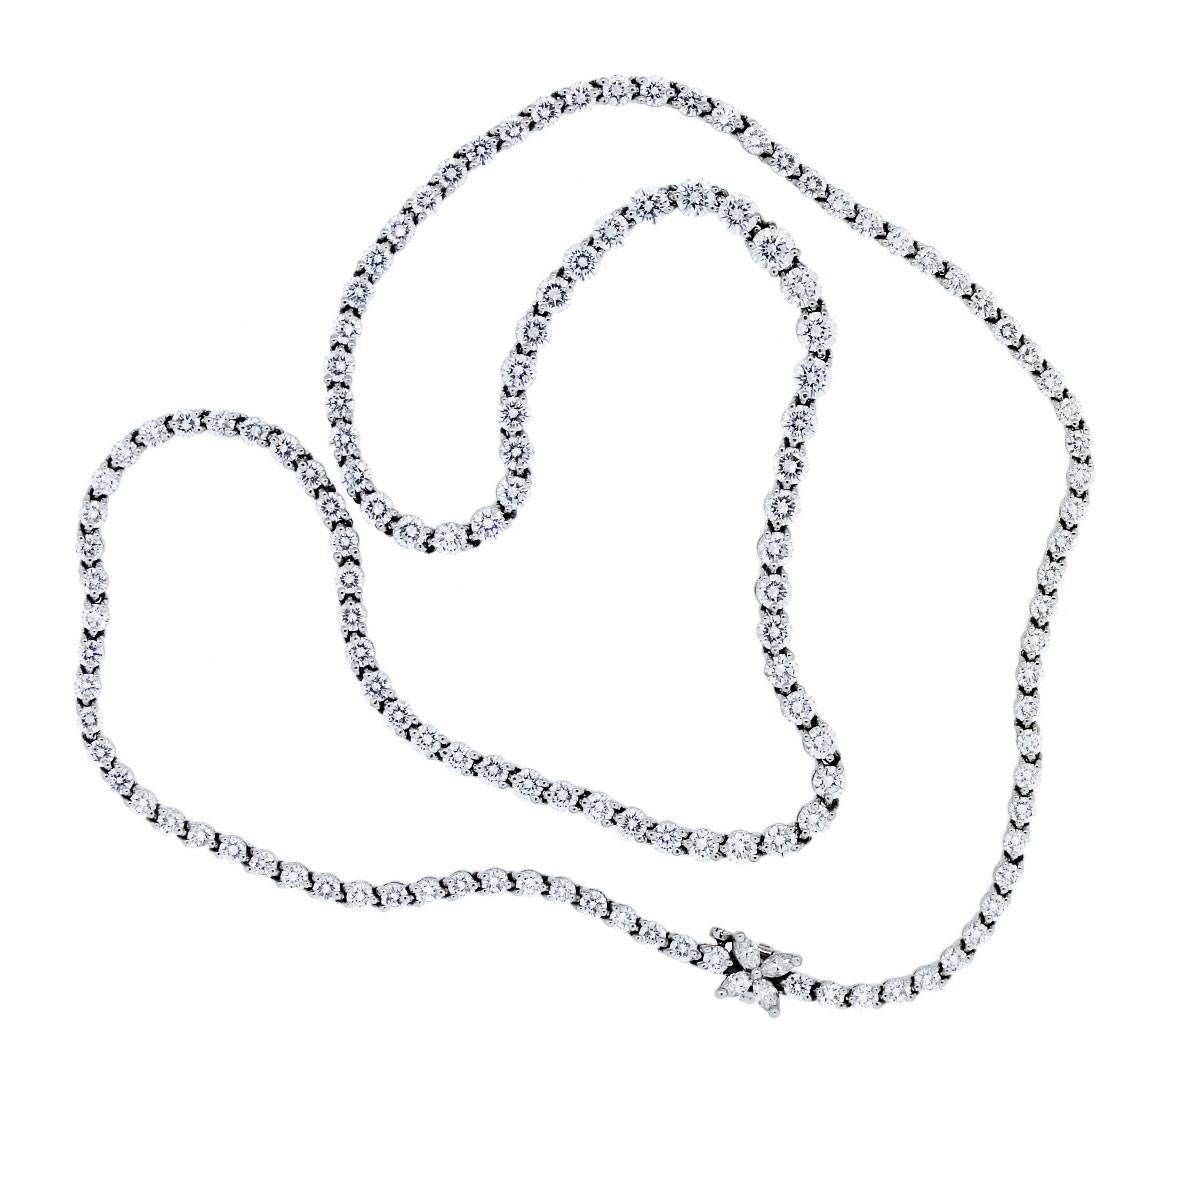 Style: Tiffany & Co. Platinum Diamond Victoria Tennis Necklace
Material: Platinum
Diamond Details: Approx. 12.5ctw of round Diamonds and marquise Diamonds placed into a flower shape.
Diamond Color: F
Diamond Clarity: V/S
Chain Length: